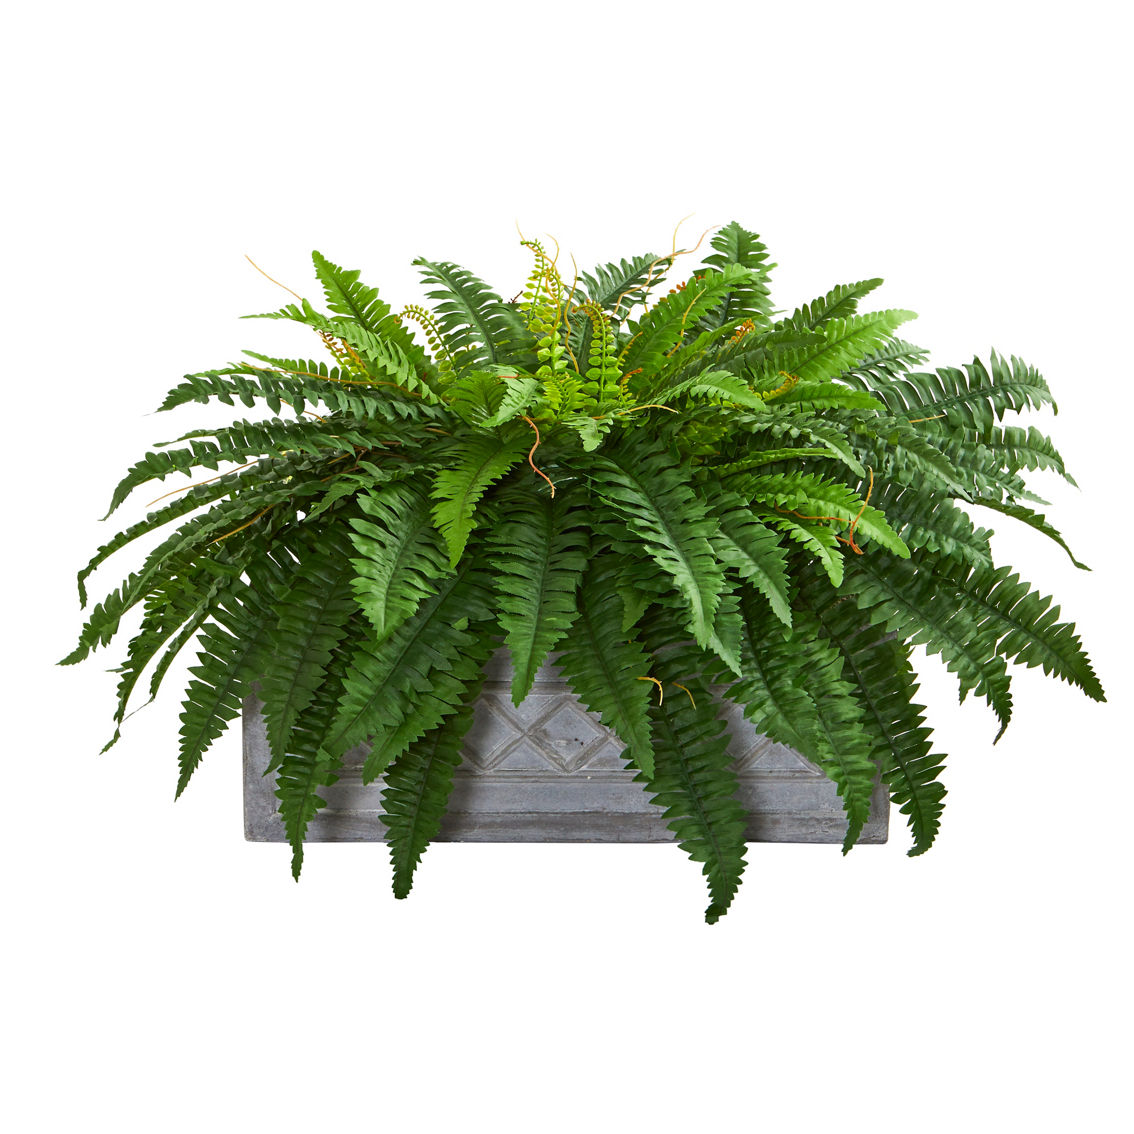 Nearly Natural Boston Fern Artificial Plant in Stone Planter - Image 2 of 2